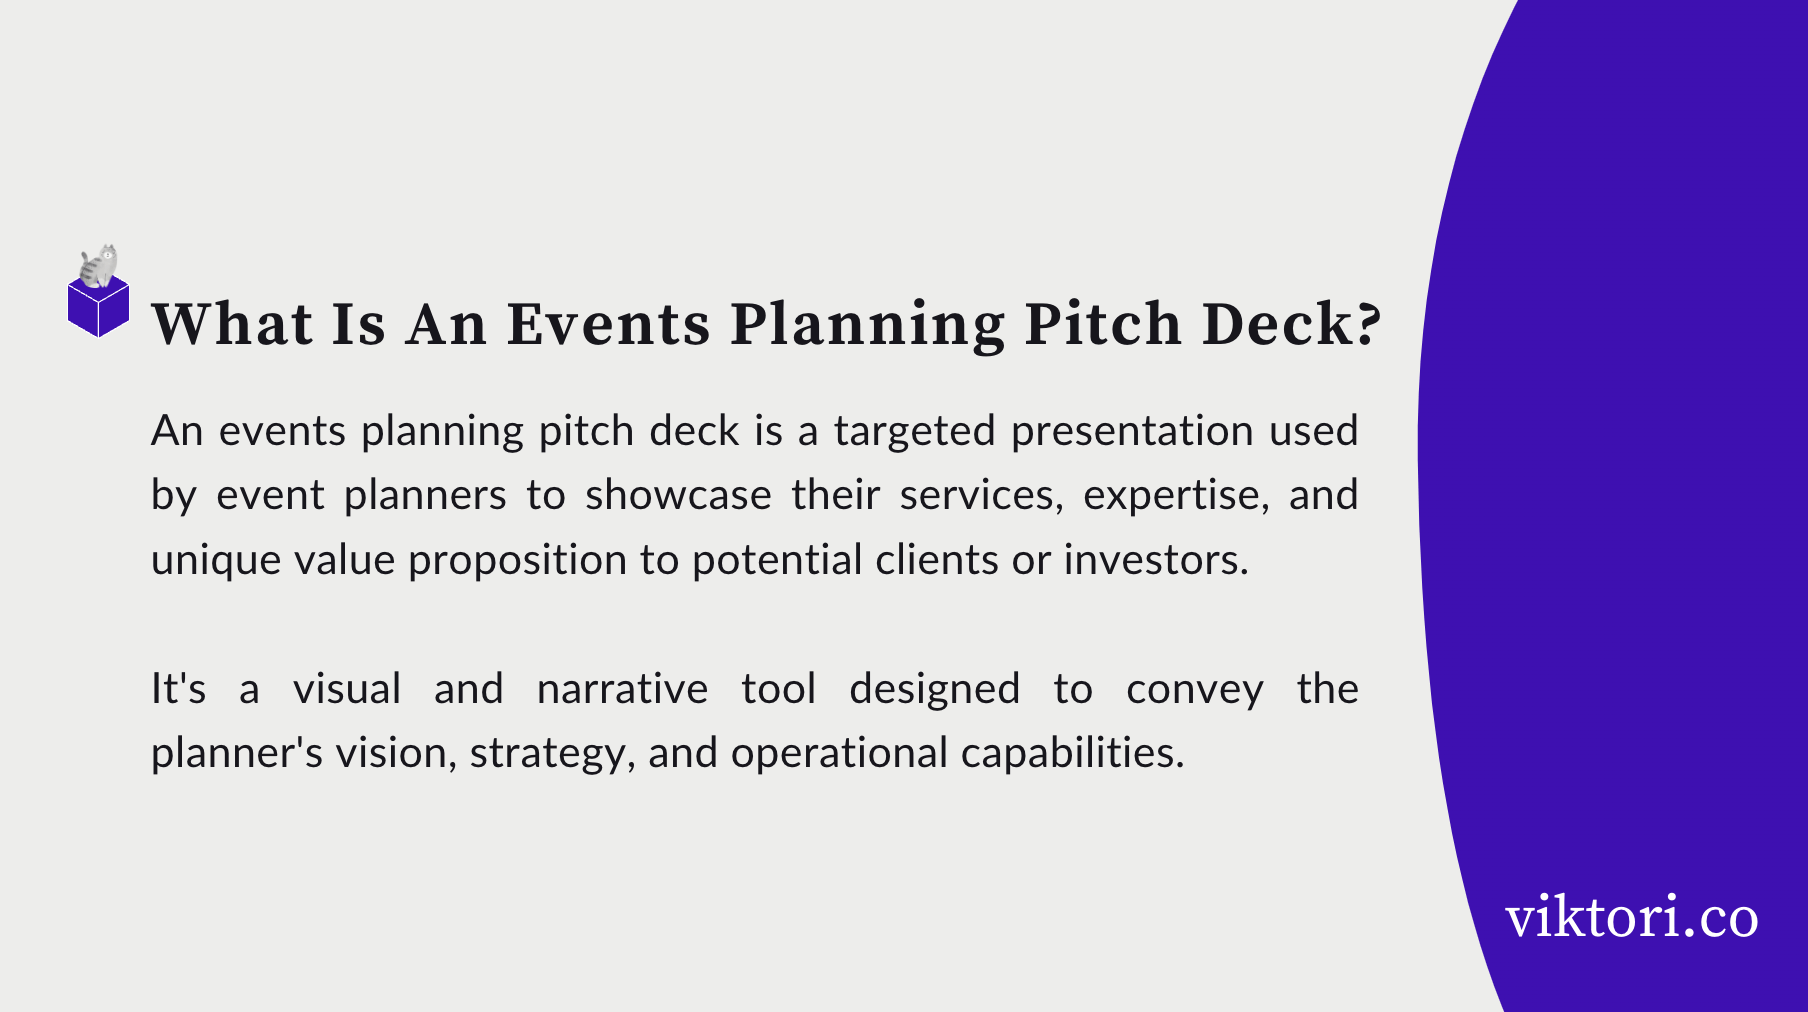 events planing pitch deck definition